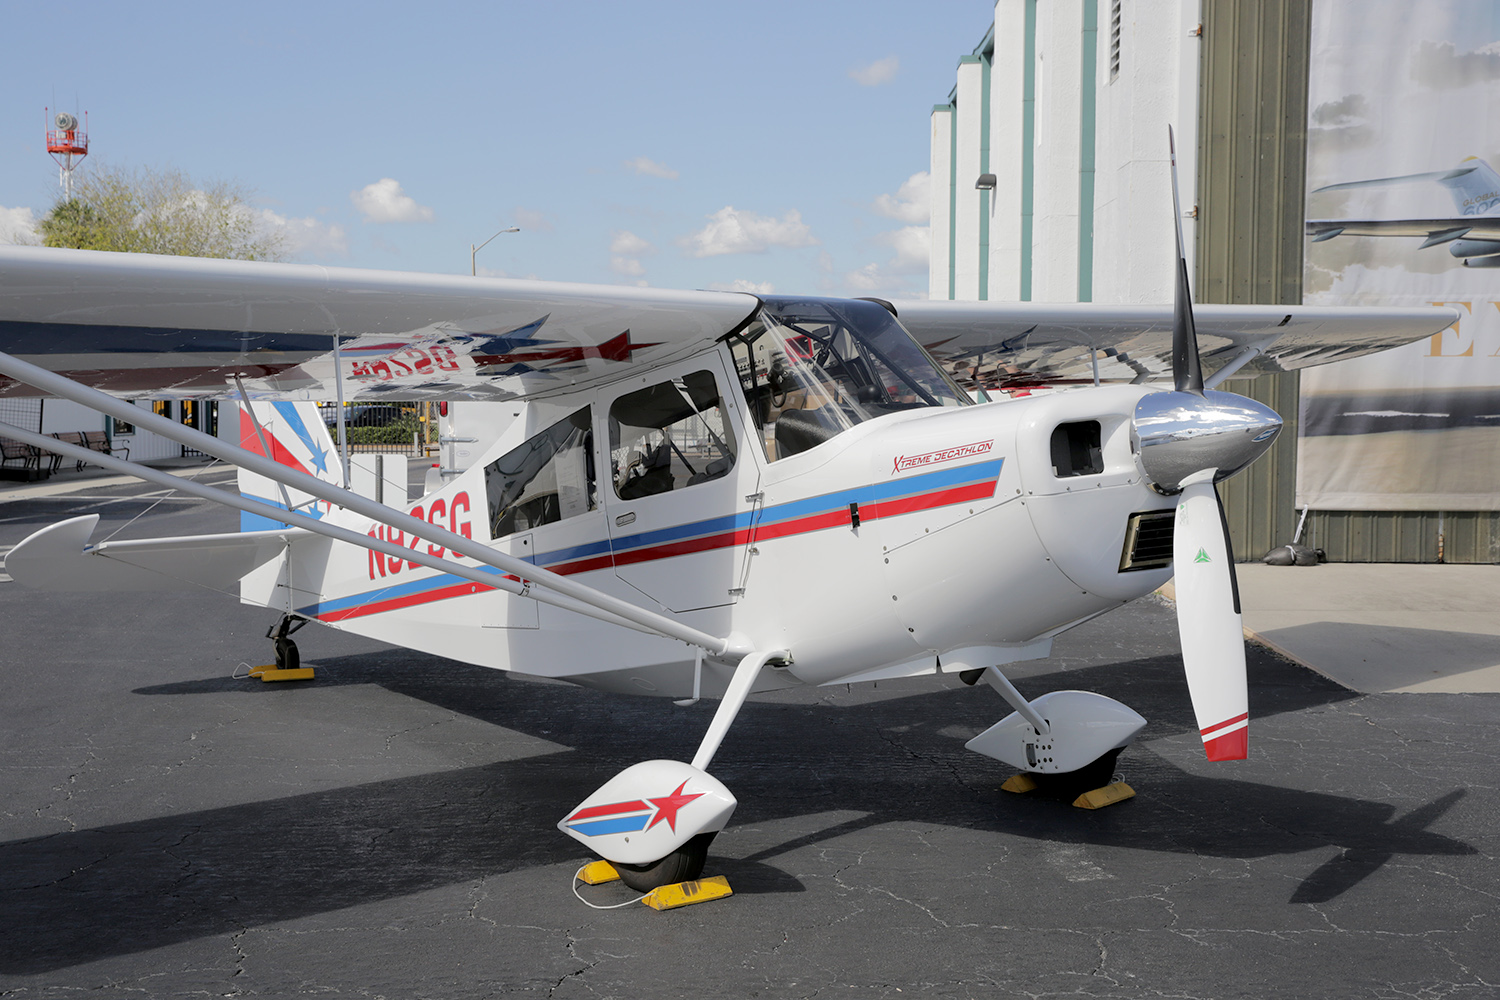 American Champion Xtreme Decathlon exhibited by American Champion Aircraft Corp.